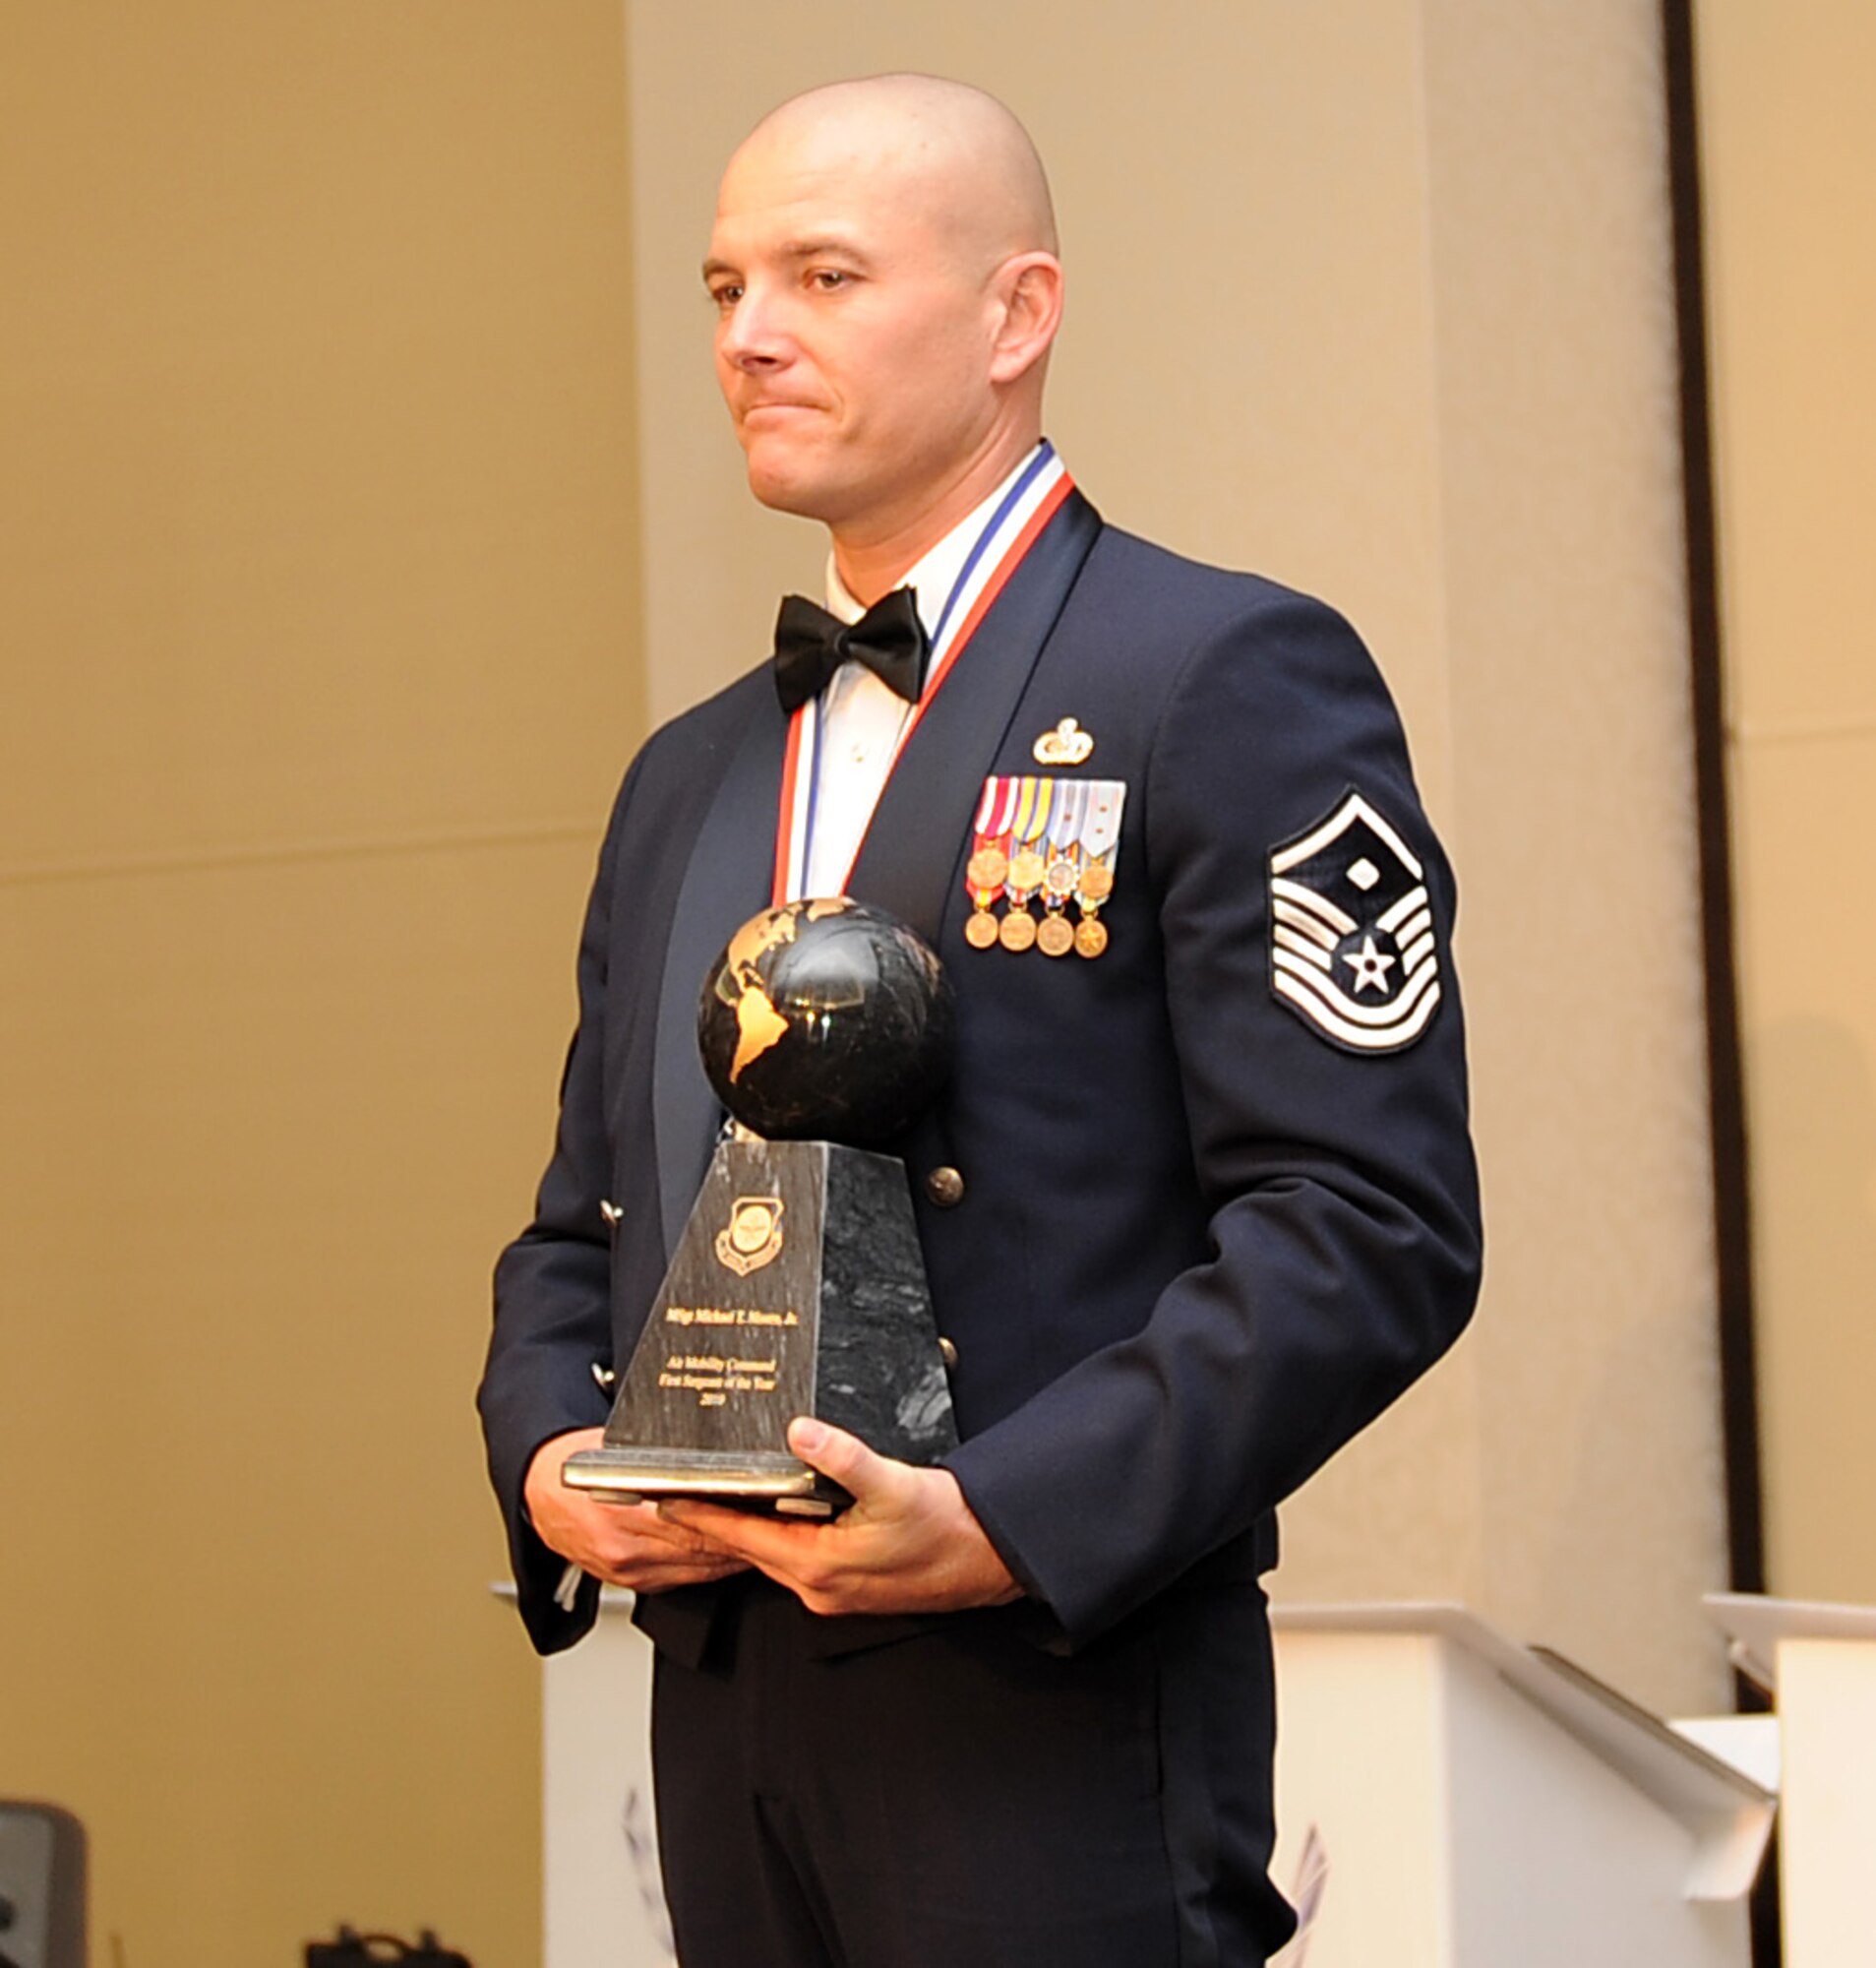 Master Sgt. Michael Moore Jr., from the 92nd Security Forces Squadron at Fairchild Air Force Base, Ill., holds his award after being named the 2010 Air Mobility Command First Sergeant of the Year during AMC's Outstanding Airmen of the Year banquet April 1, 2011, at Scott AFB, Ill. (U.S. Air Force Photo/Airman 1st Class Divine Cox)
